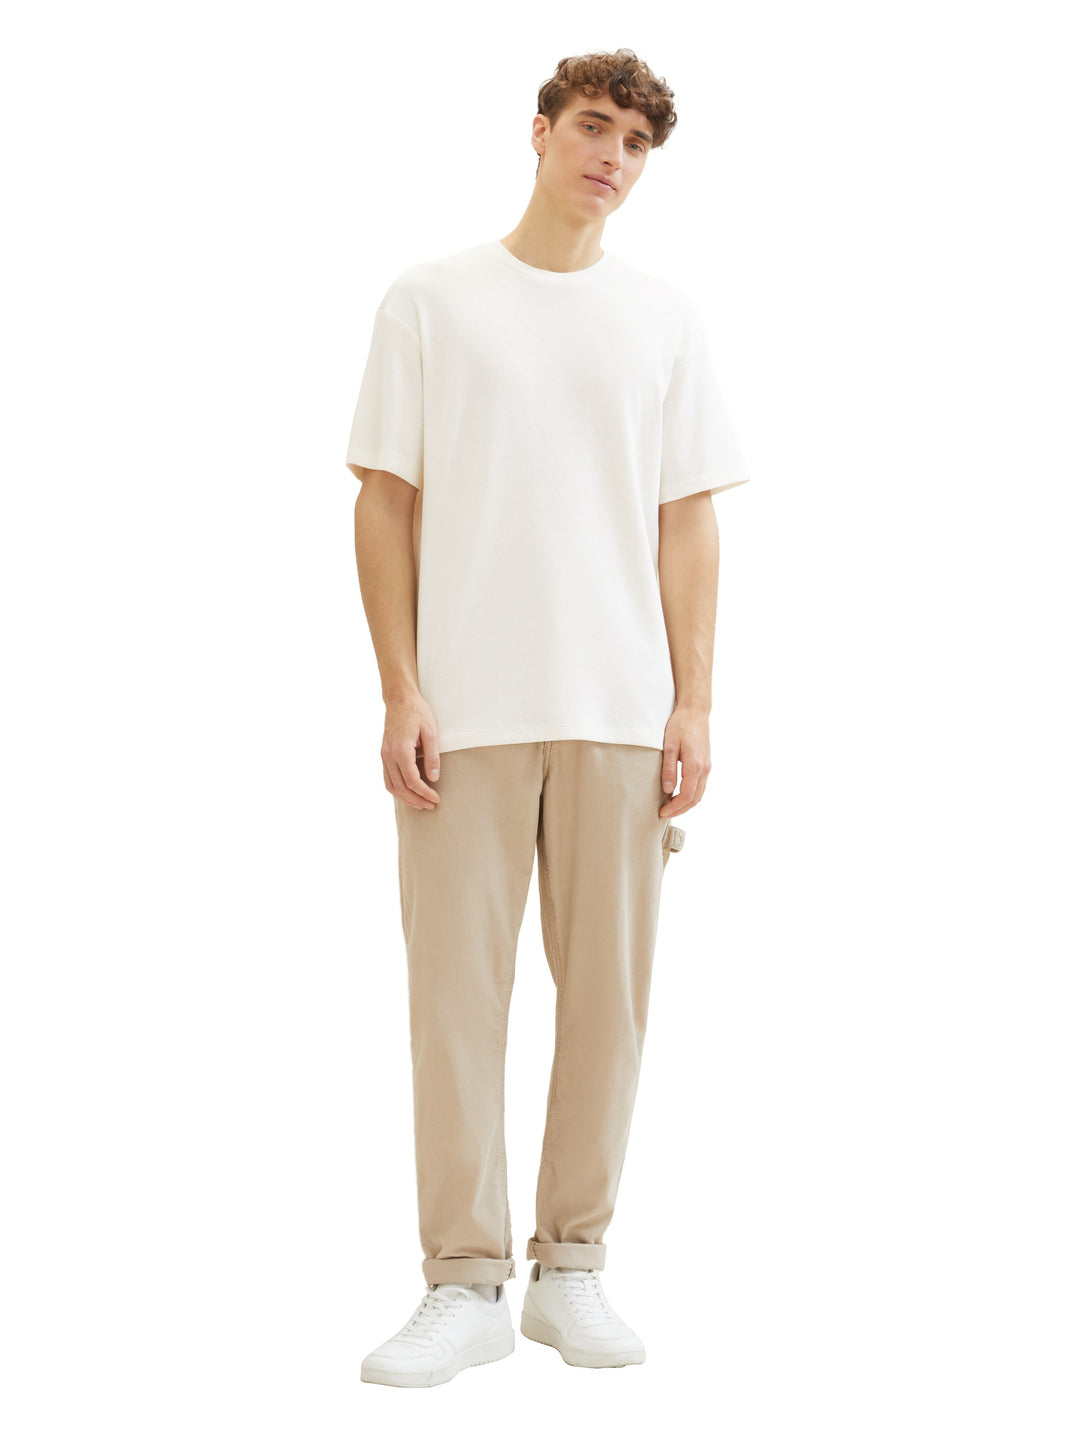 RELAXED STRUCTURED T-SHIRT